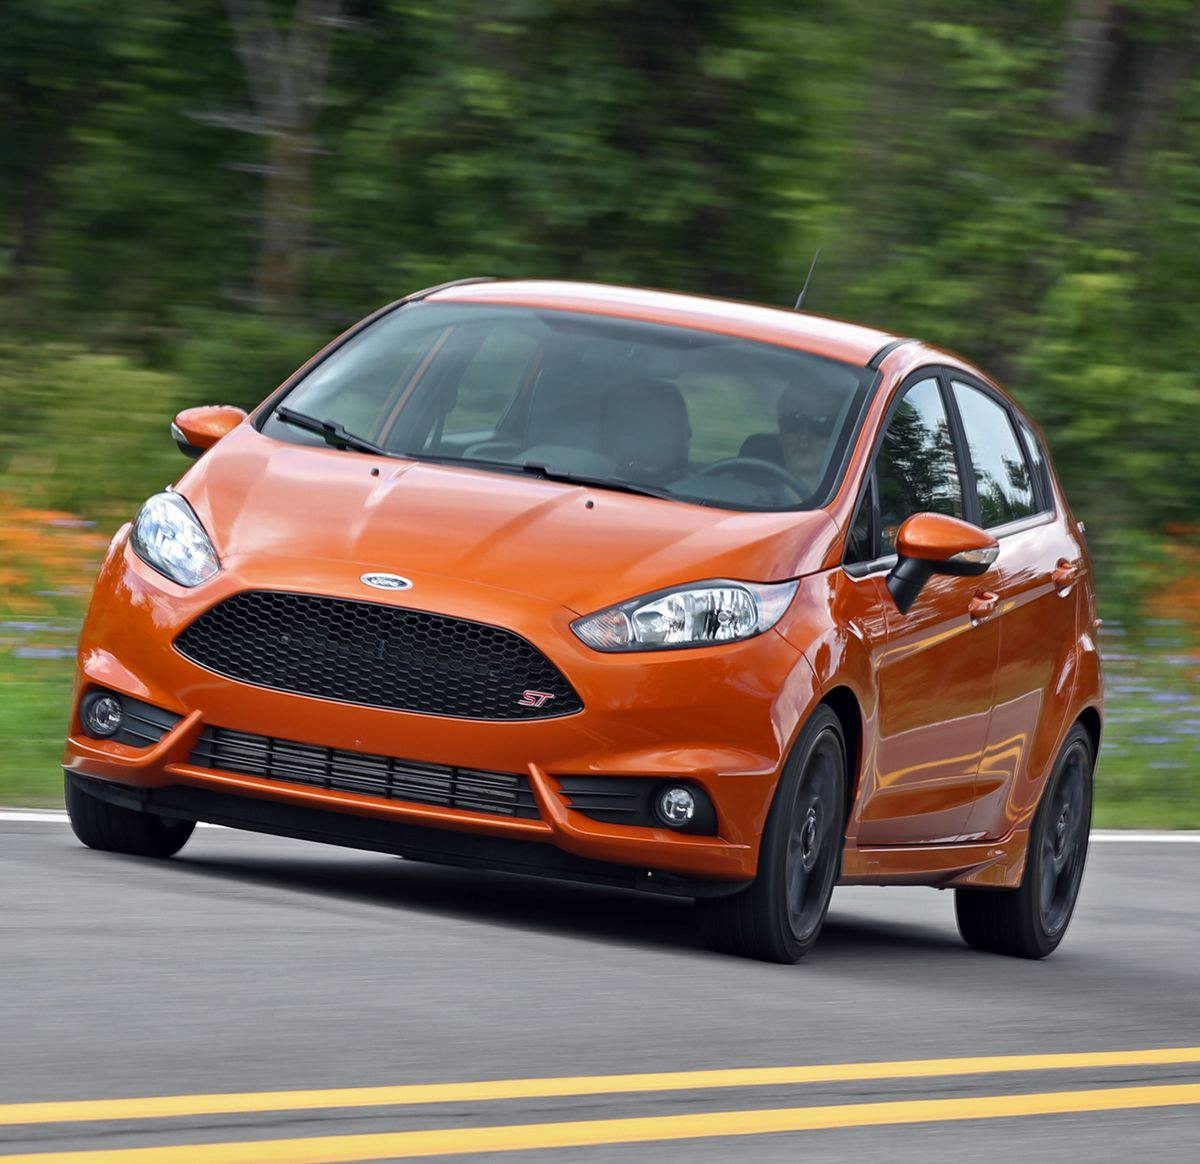 2017 Ford Fiesta ST Tested: A Fond Farewell?